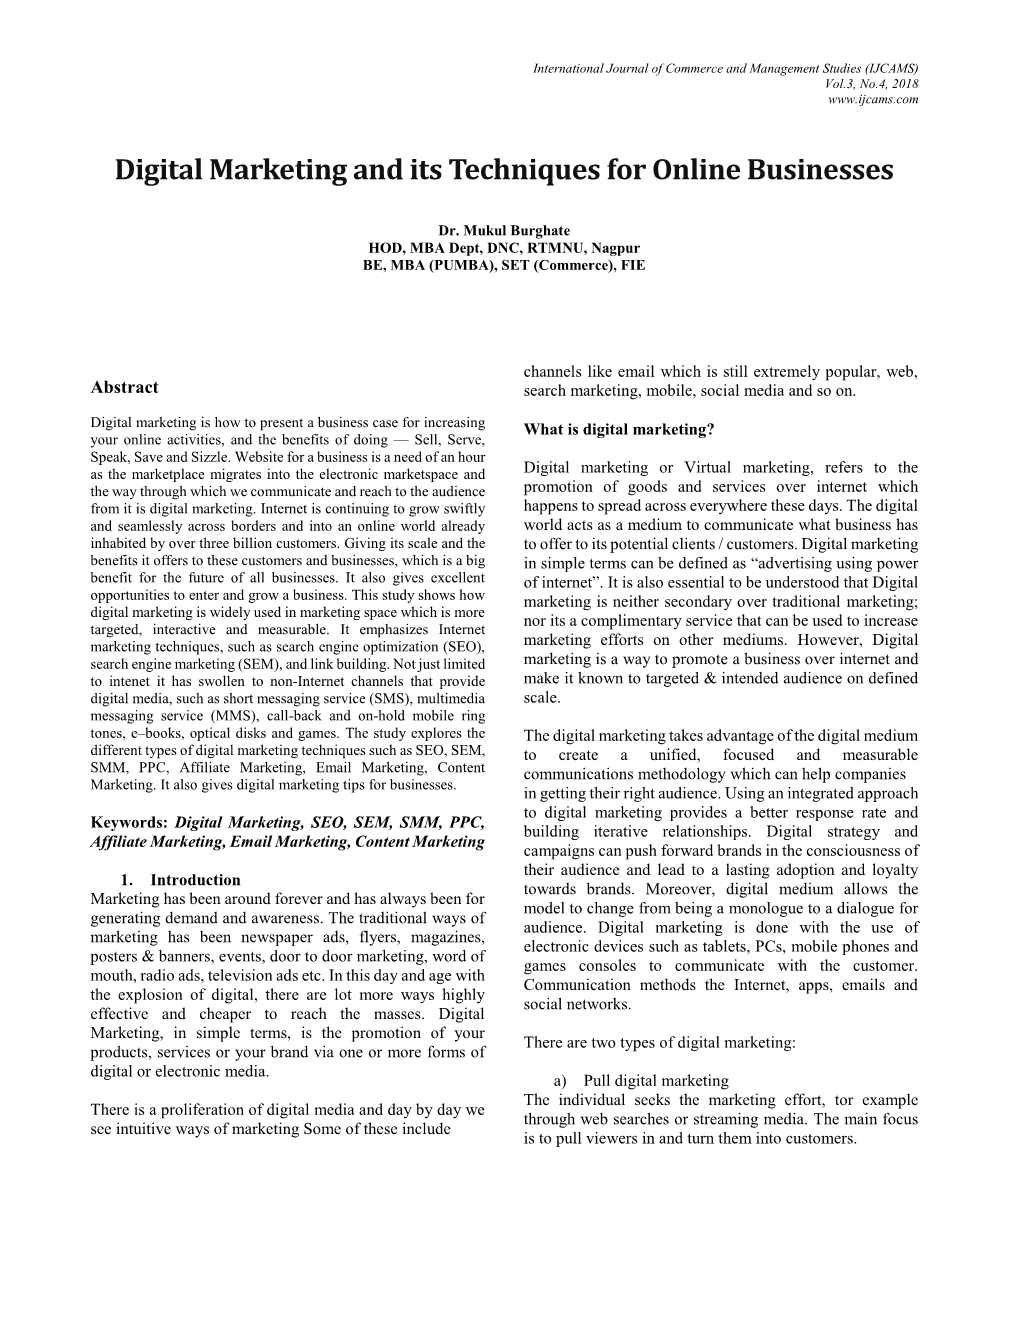 Digital Marketing and Its Techniques for Online Businesses